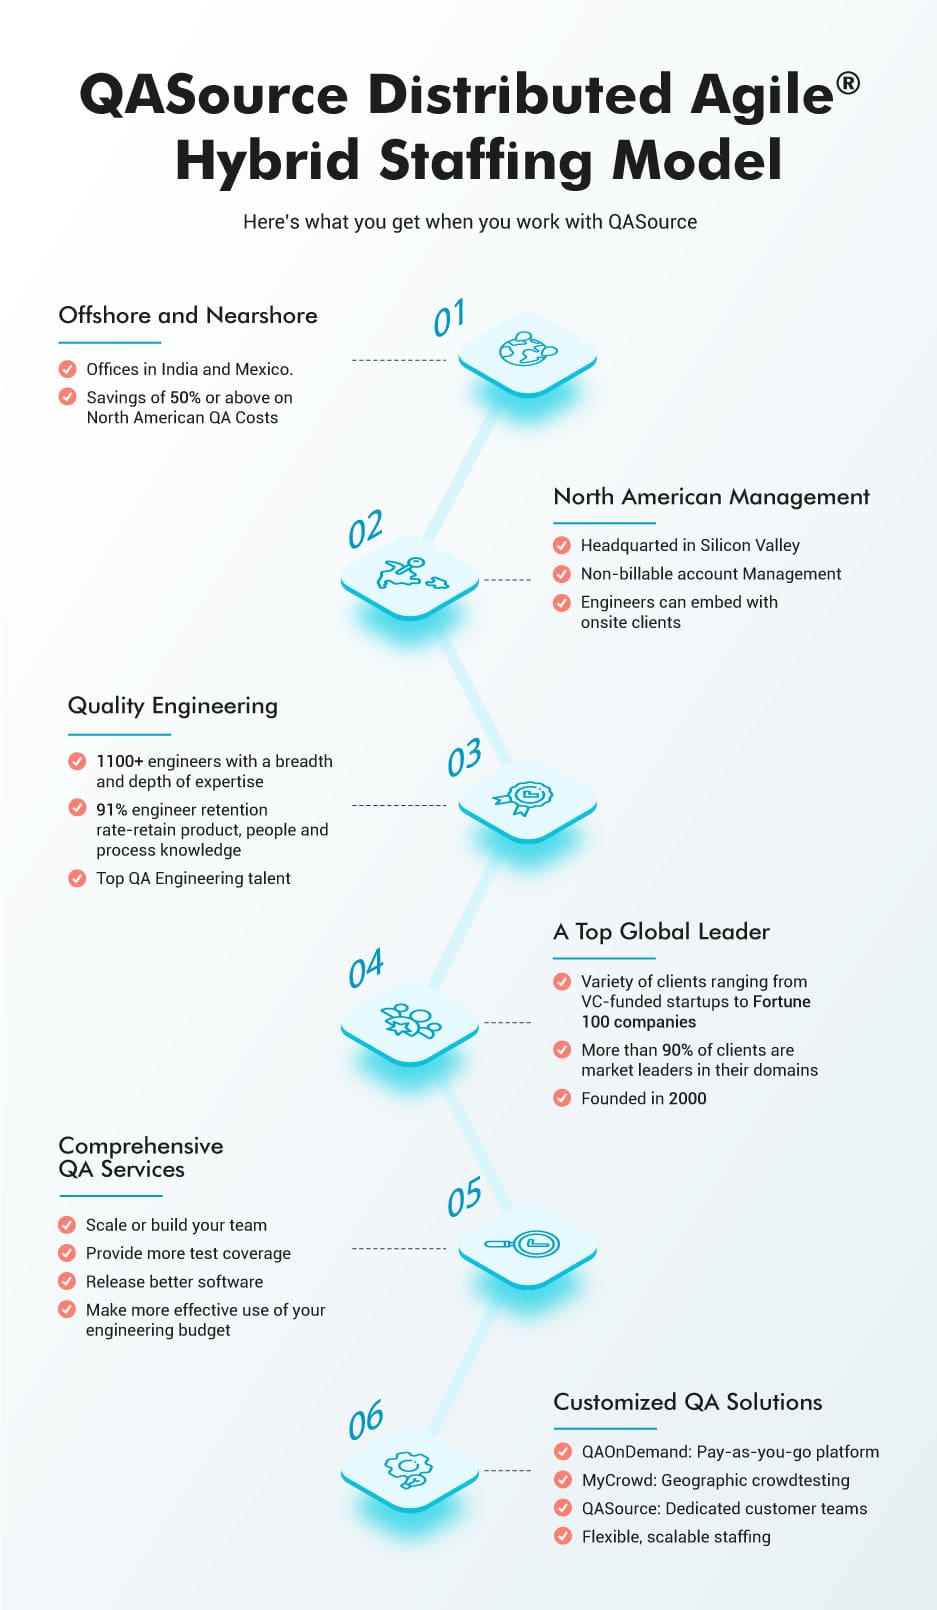 Top 6 Benefits of QASource's Distributed Agile Staffing Model